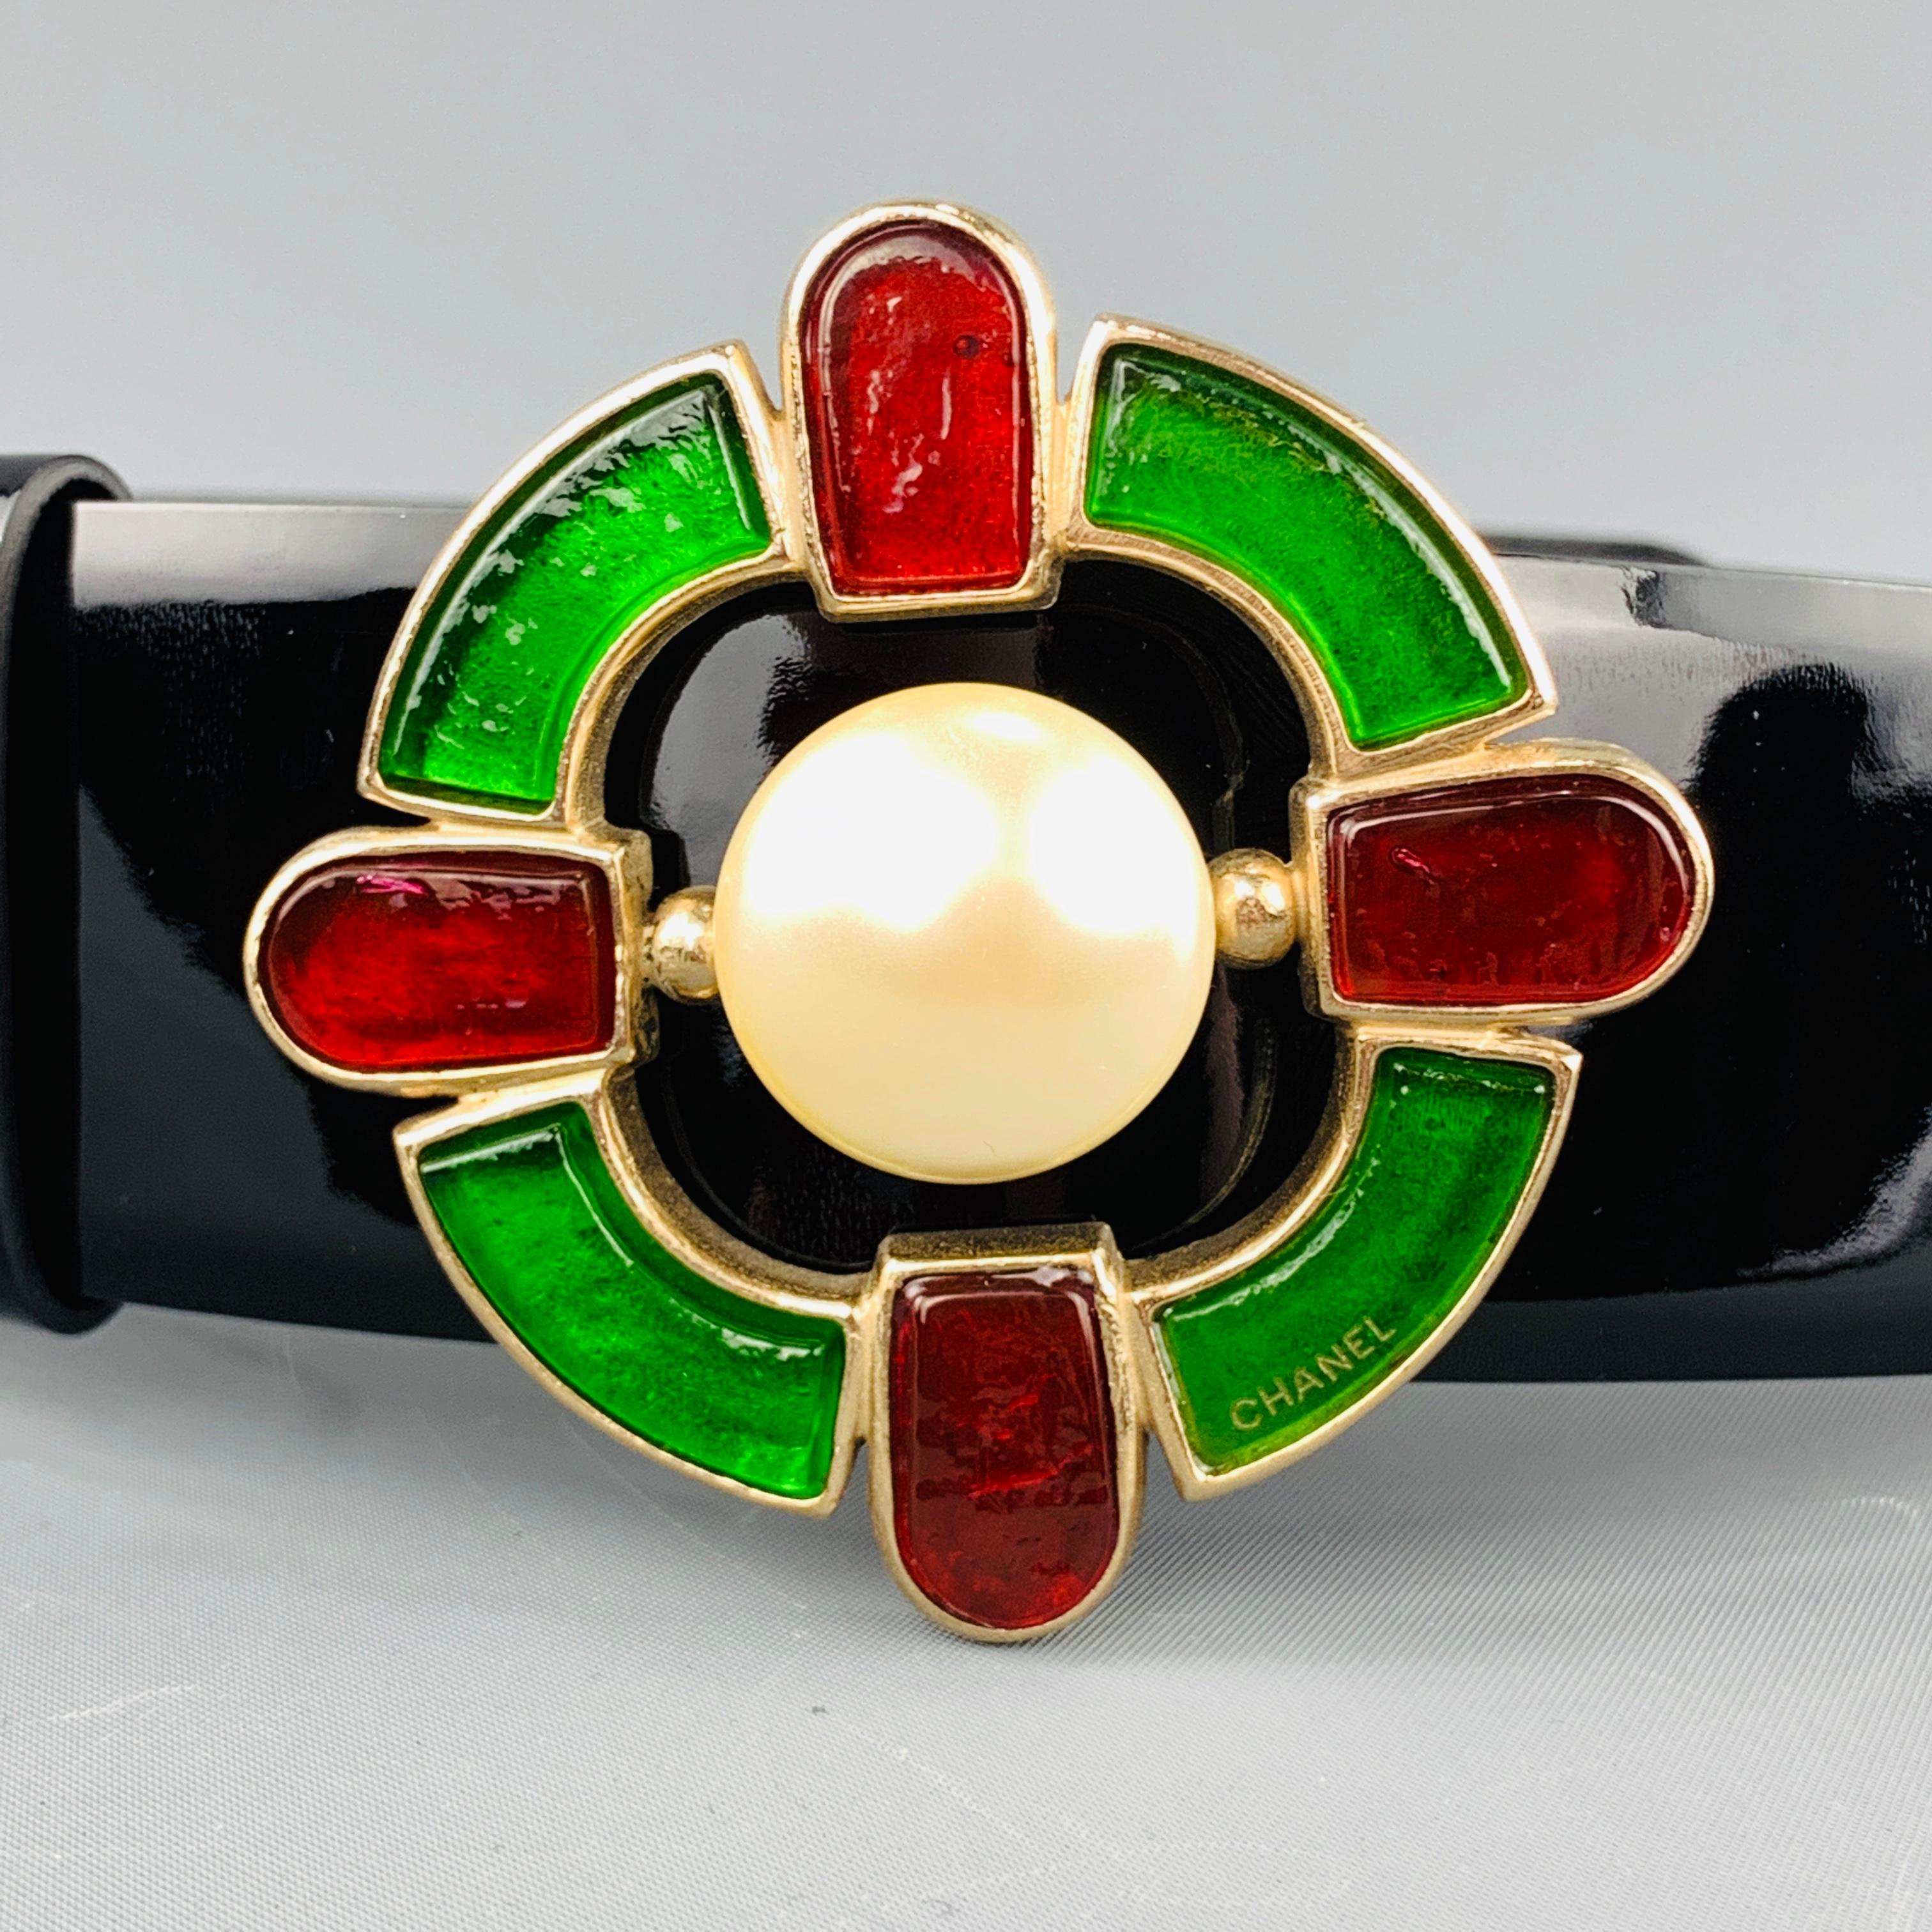 CHANEL Fall Winter 2007 Collection belt features a black glossy patent leather thick strap with a light gold tone metal Gripoix Celtic cross buckle detailed with red and green gem and faux pearl center. Made in Italy.
 
Excellent Pre-Owned